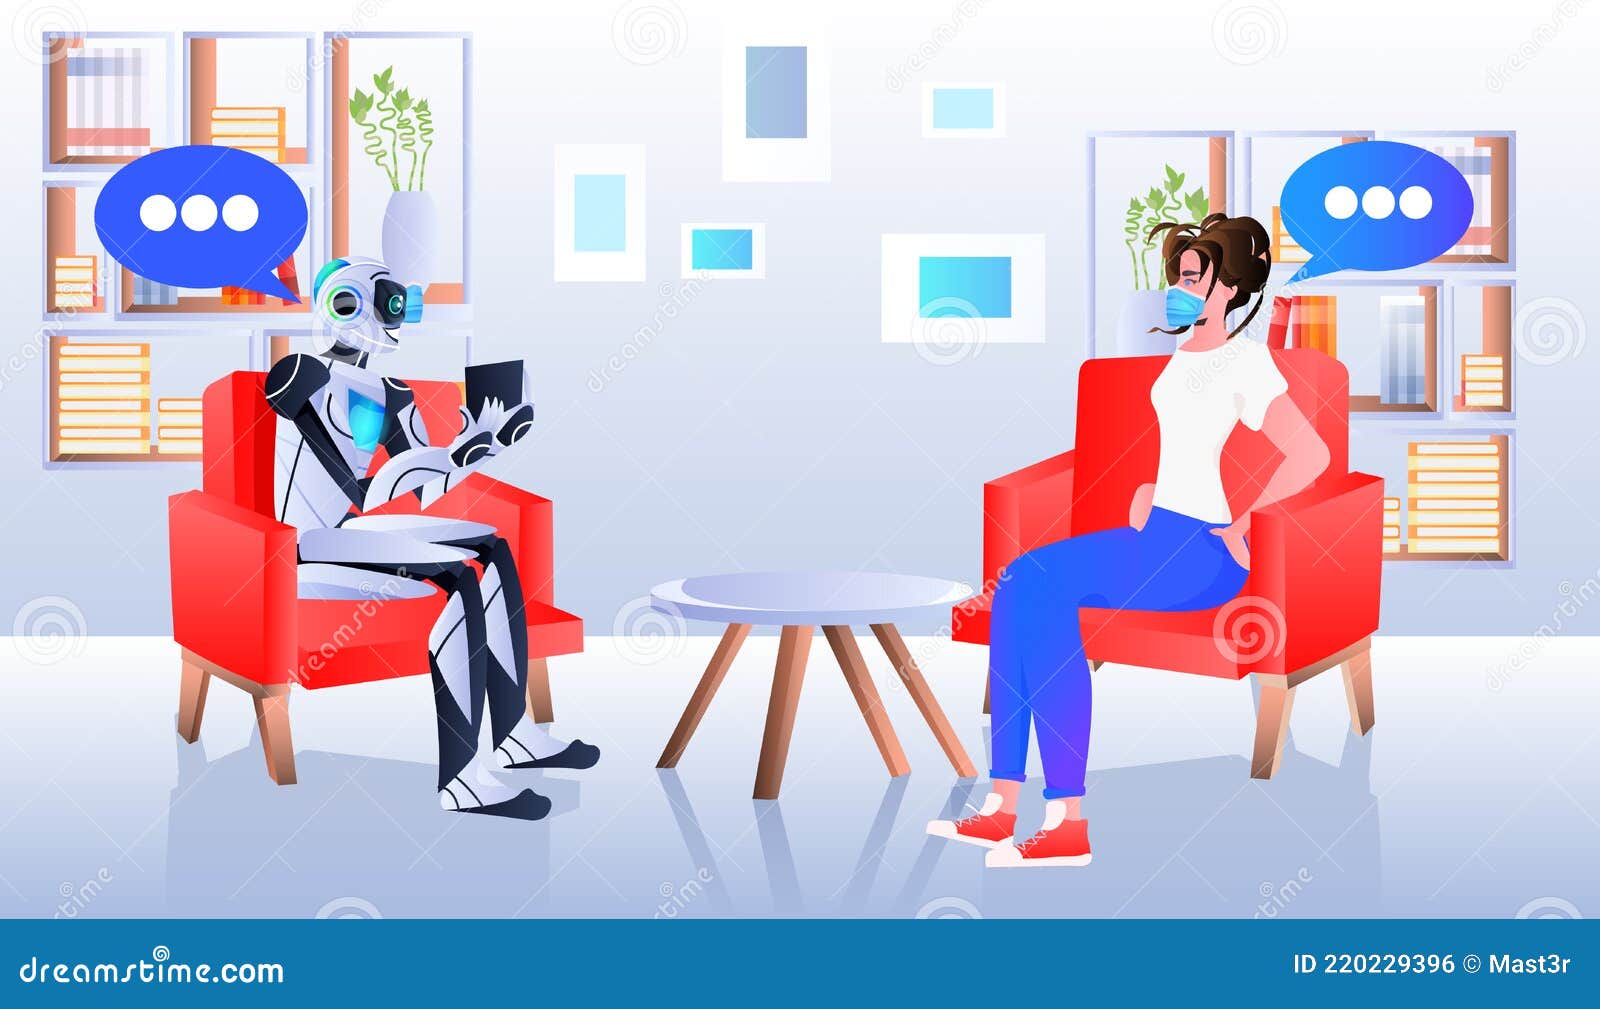 robot psychologist discussing with woman patient in mask psychotherapeutic counseling psychotherapy session